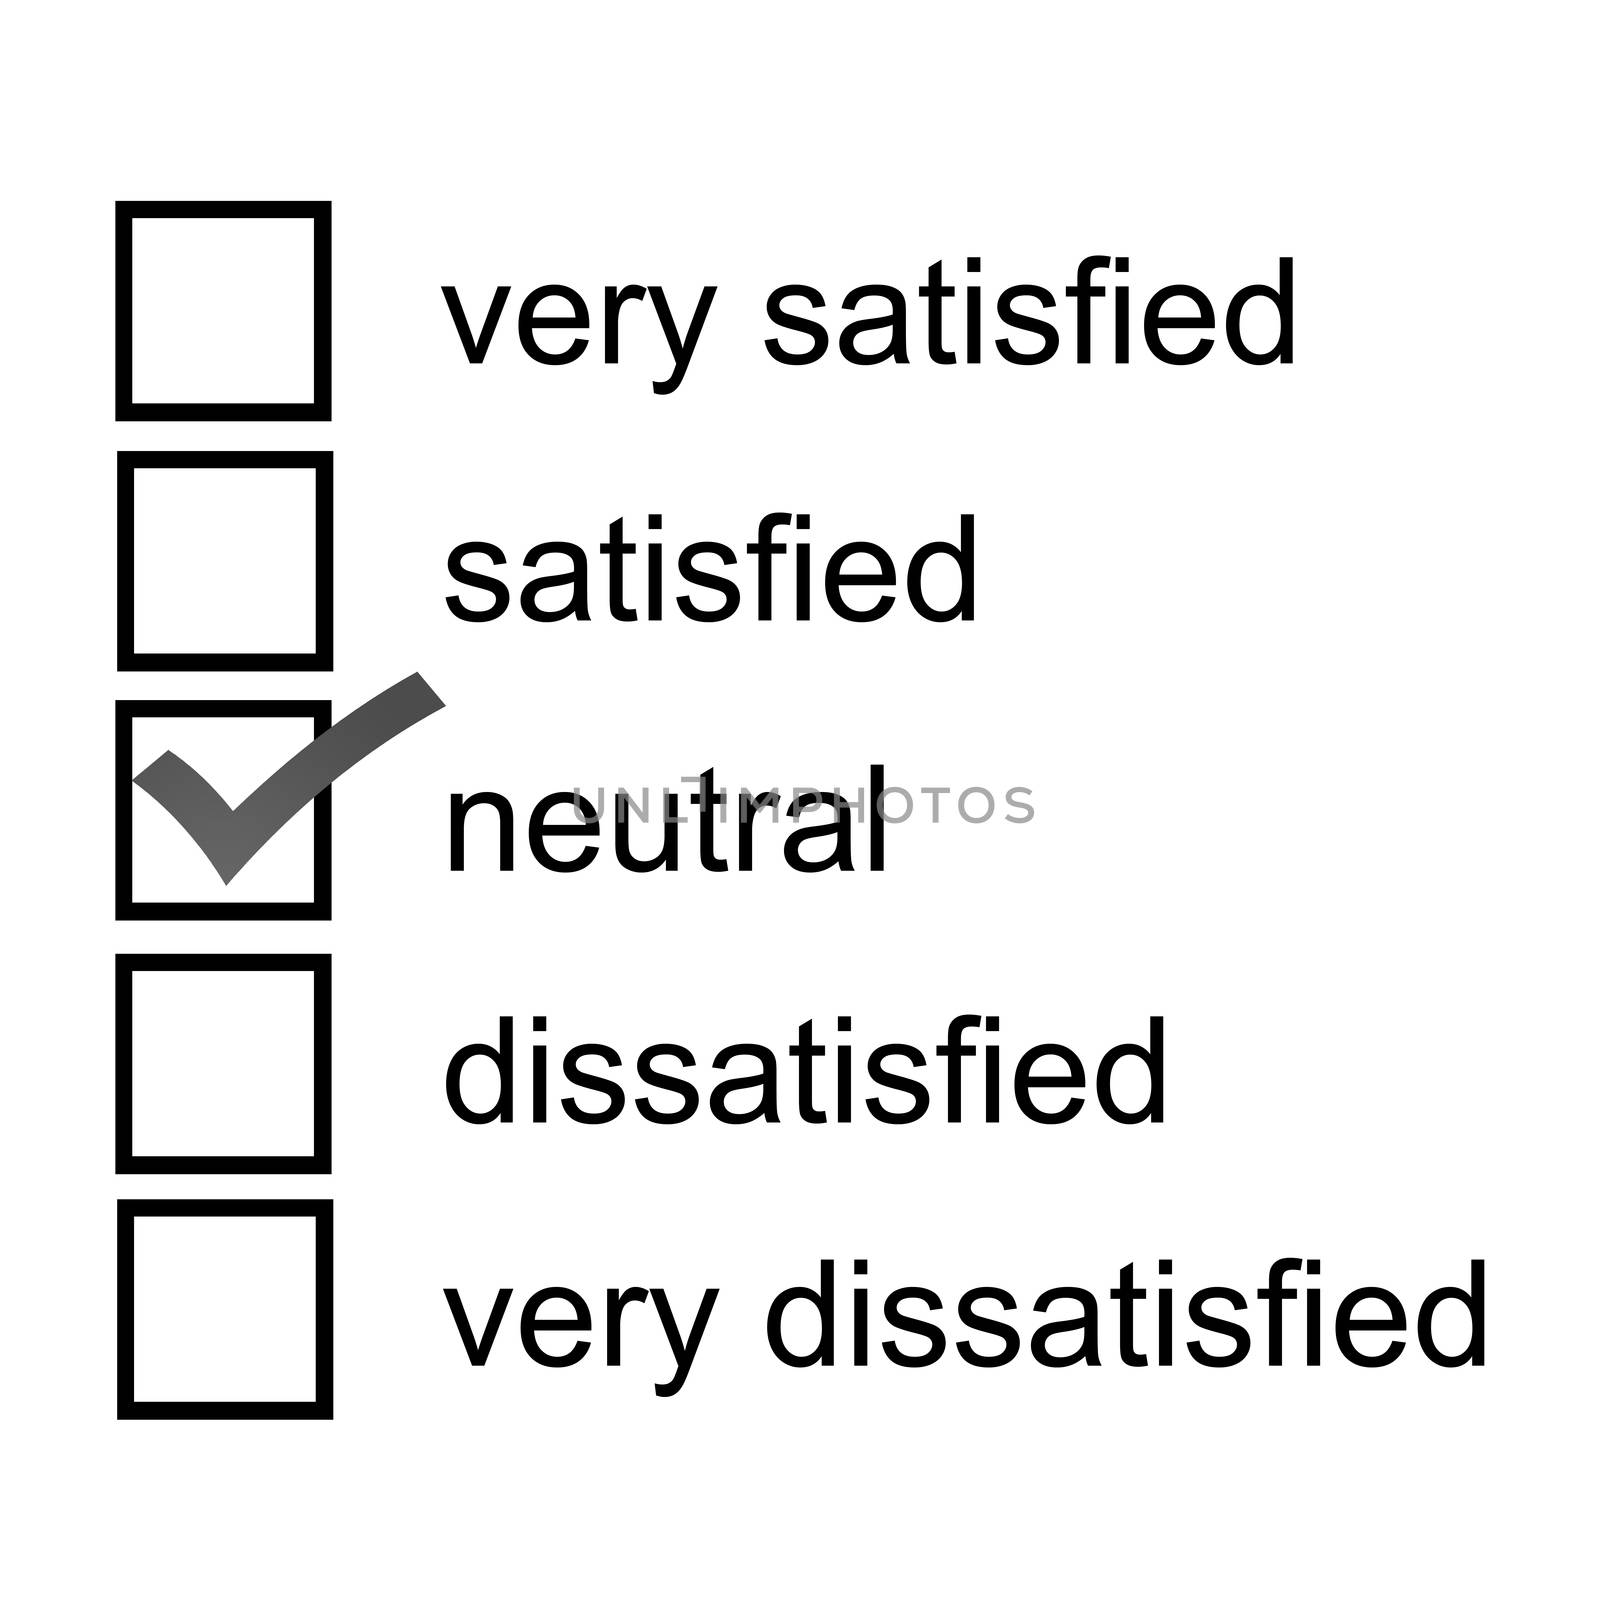 A neutral opinion survey response 5 point likert scale